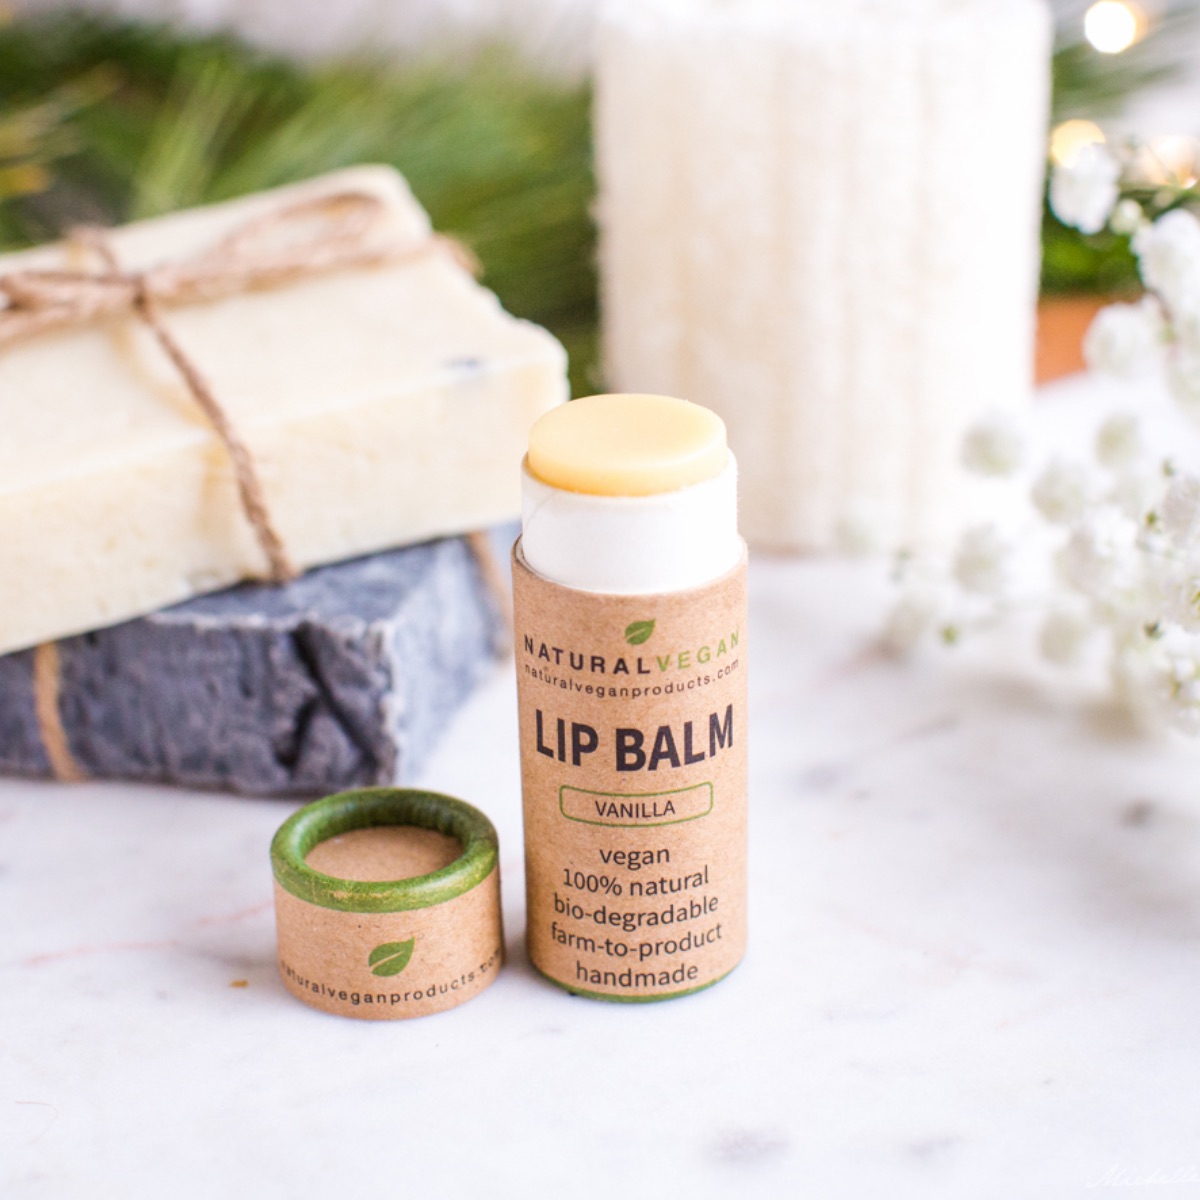 A tube of vegan lip balm in a biodegradable eco-friendly tube in a holiday gift setting.